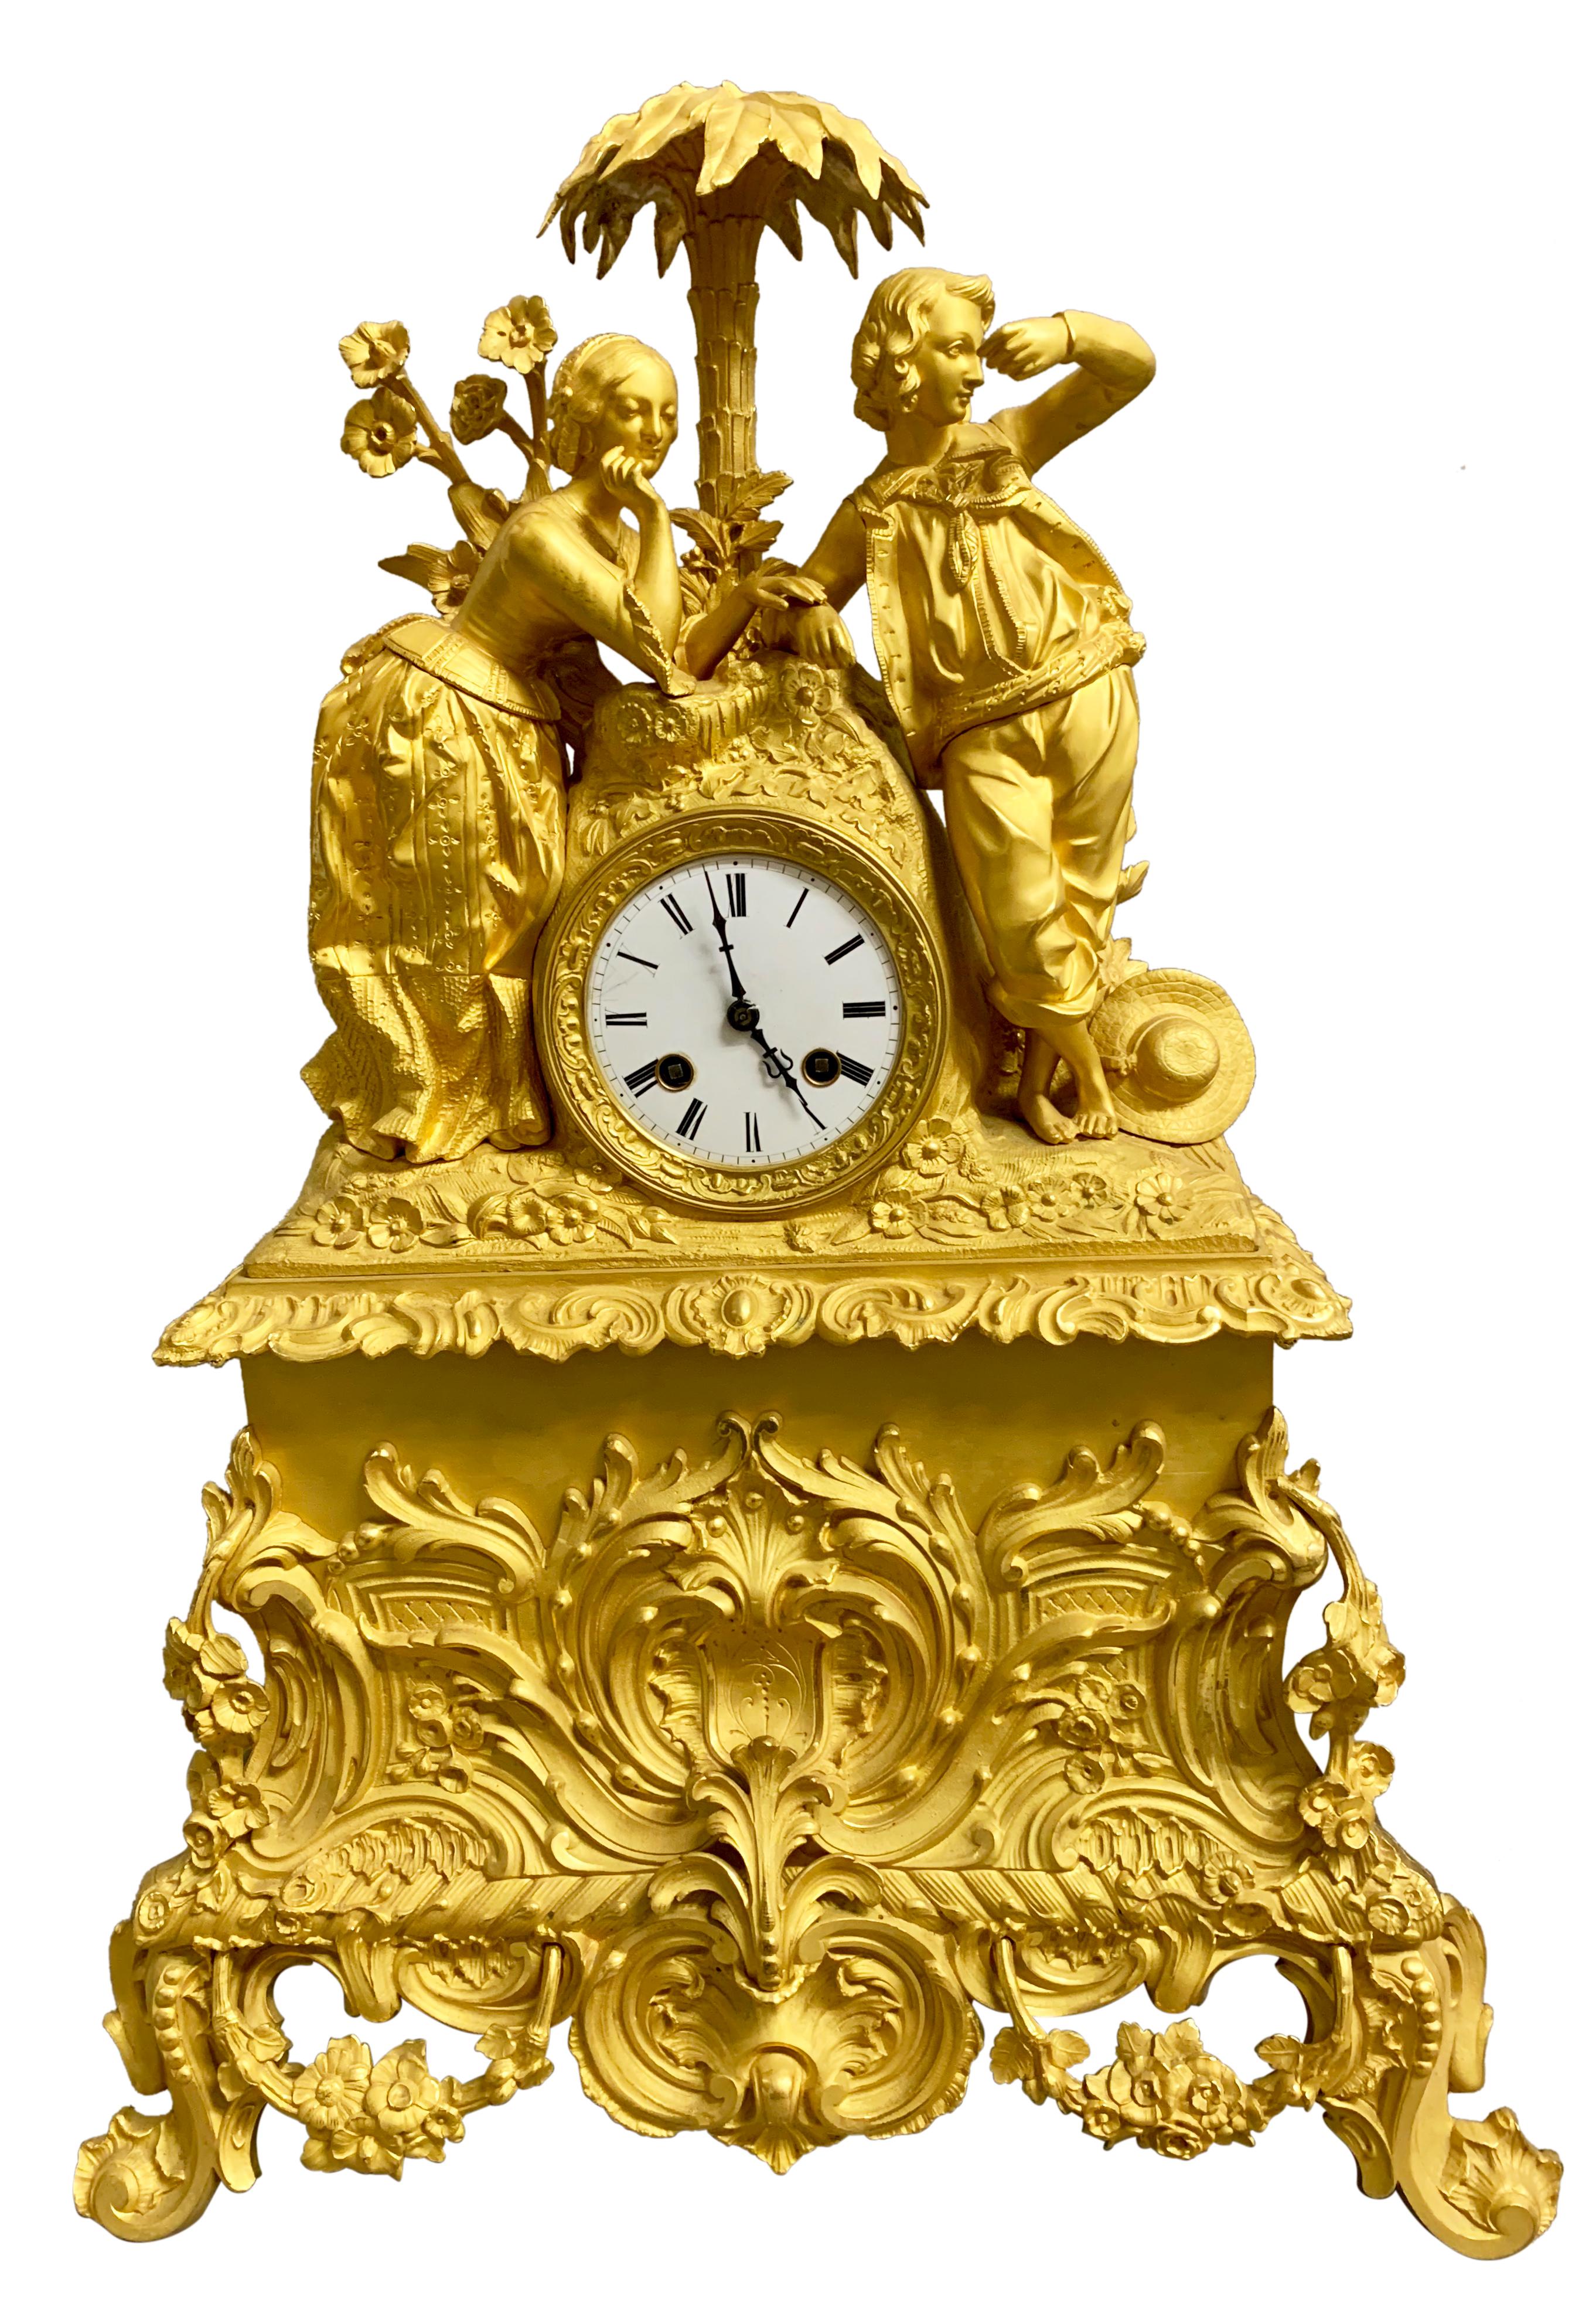 A French Charles X period ormolu mantel clock. The drum case flanked by a young couple standing under a palm tree with flowers all around, while the lady touched the man's hand.
The superb and original ormolu clock, with 8 day duration, silk